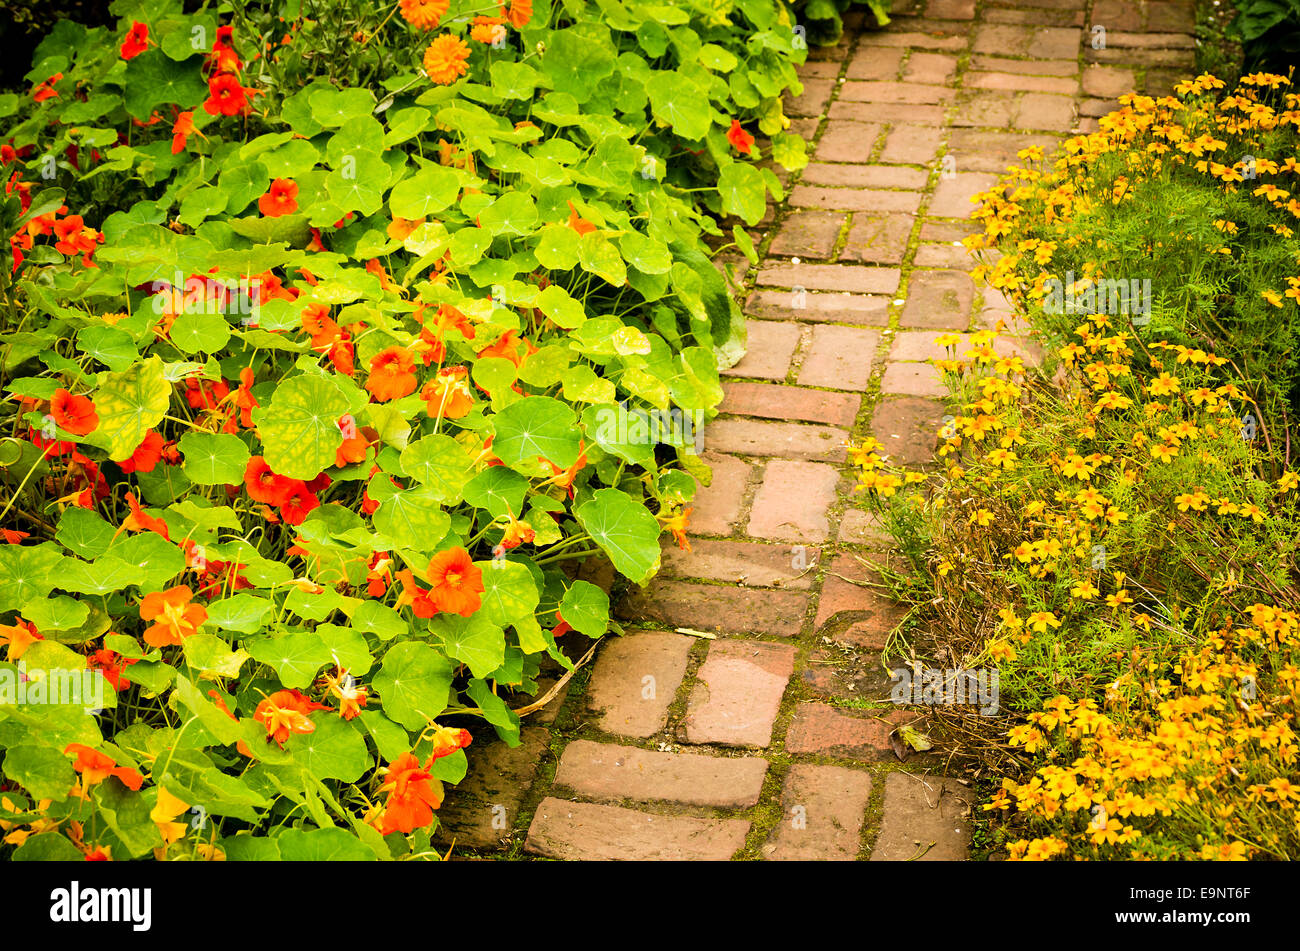 Flowers flanking a vegetable garden path Stock Photo